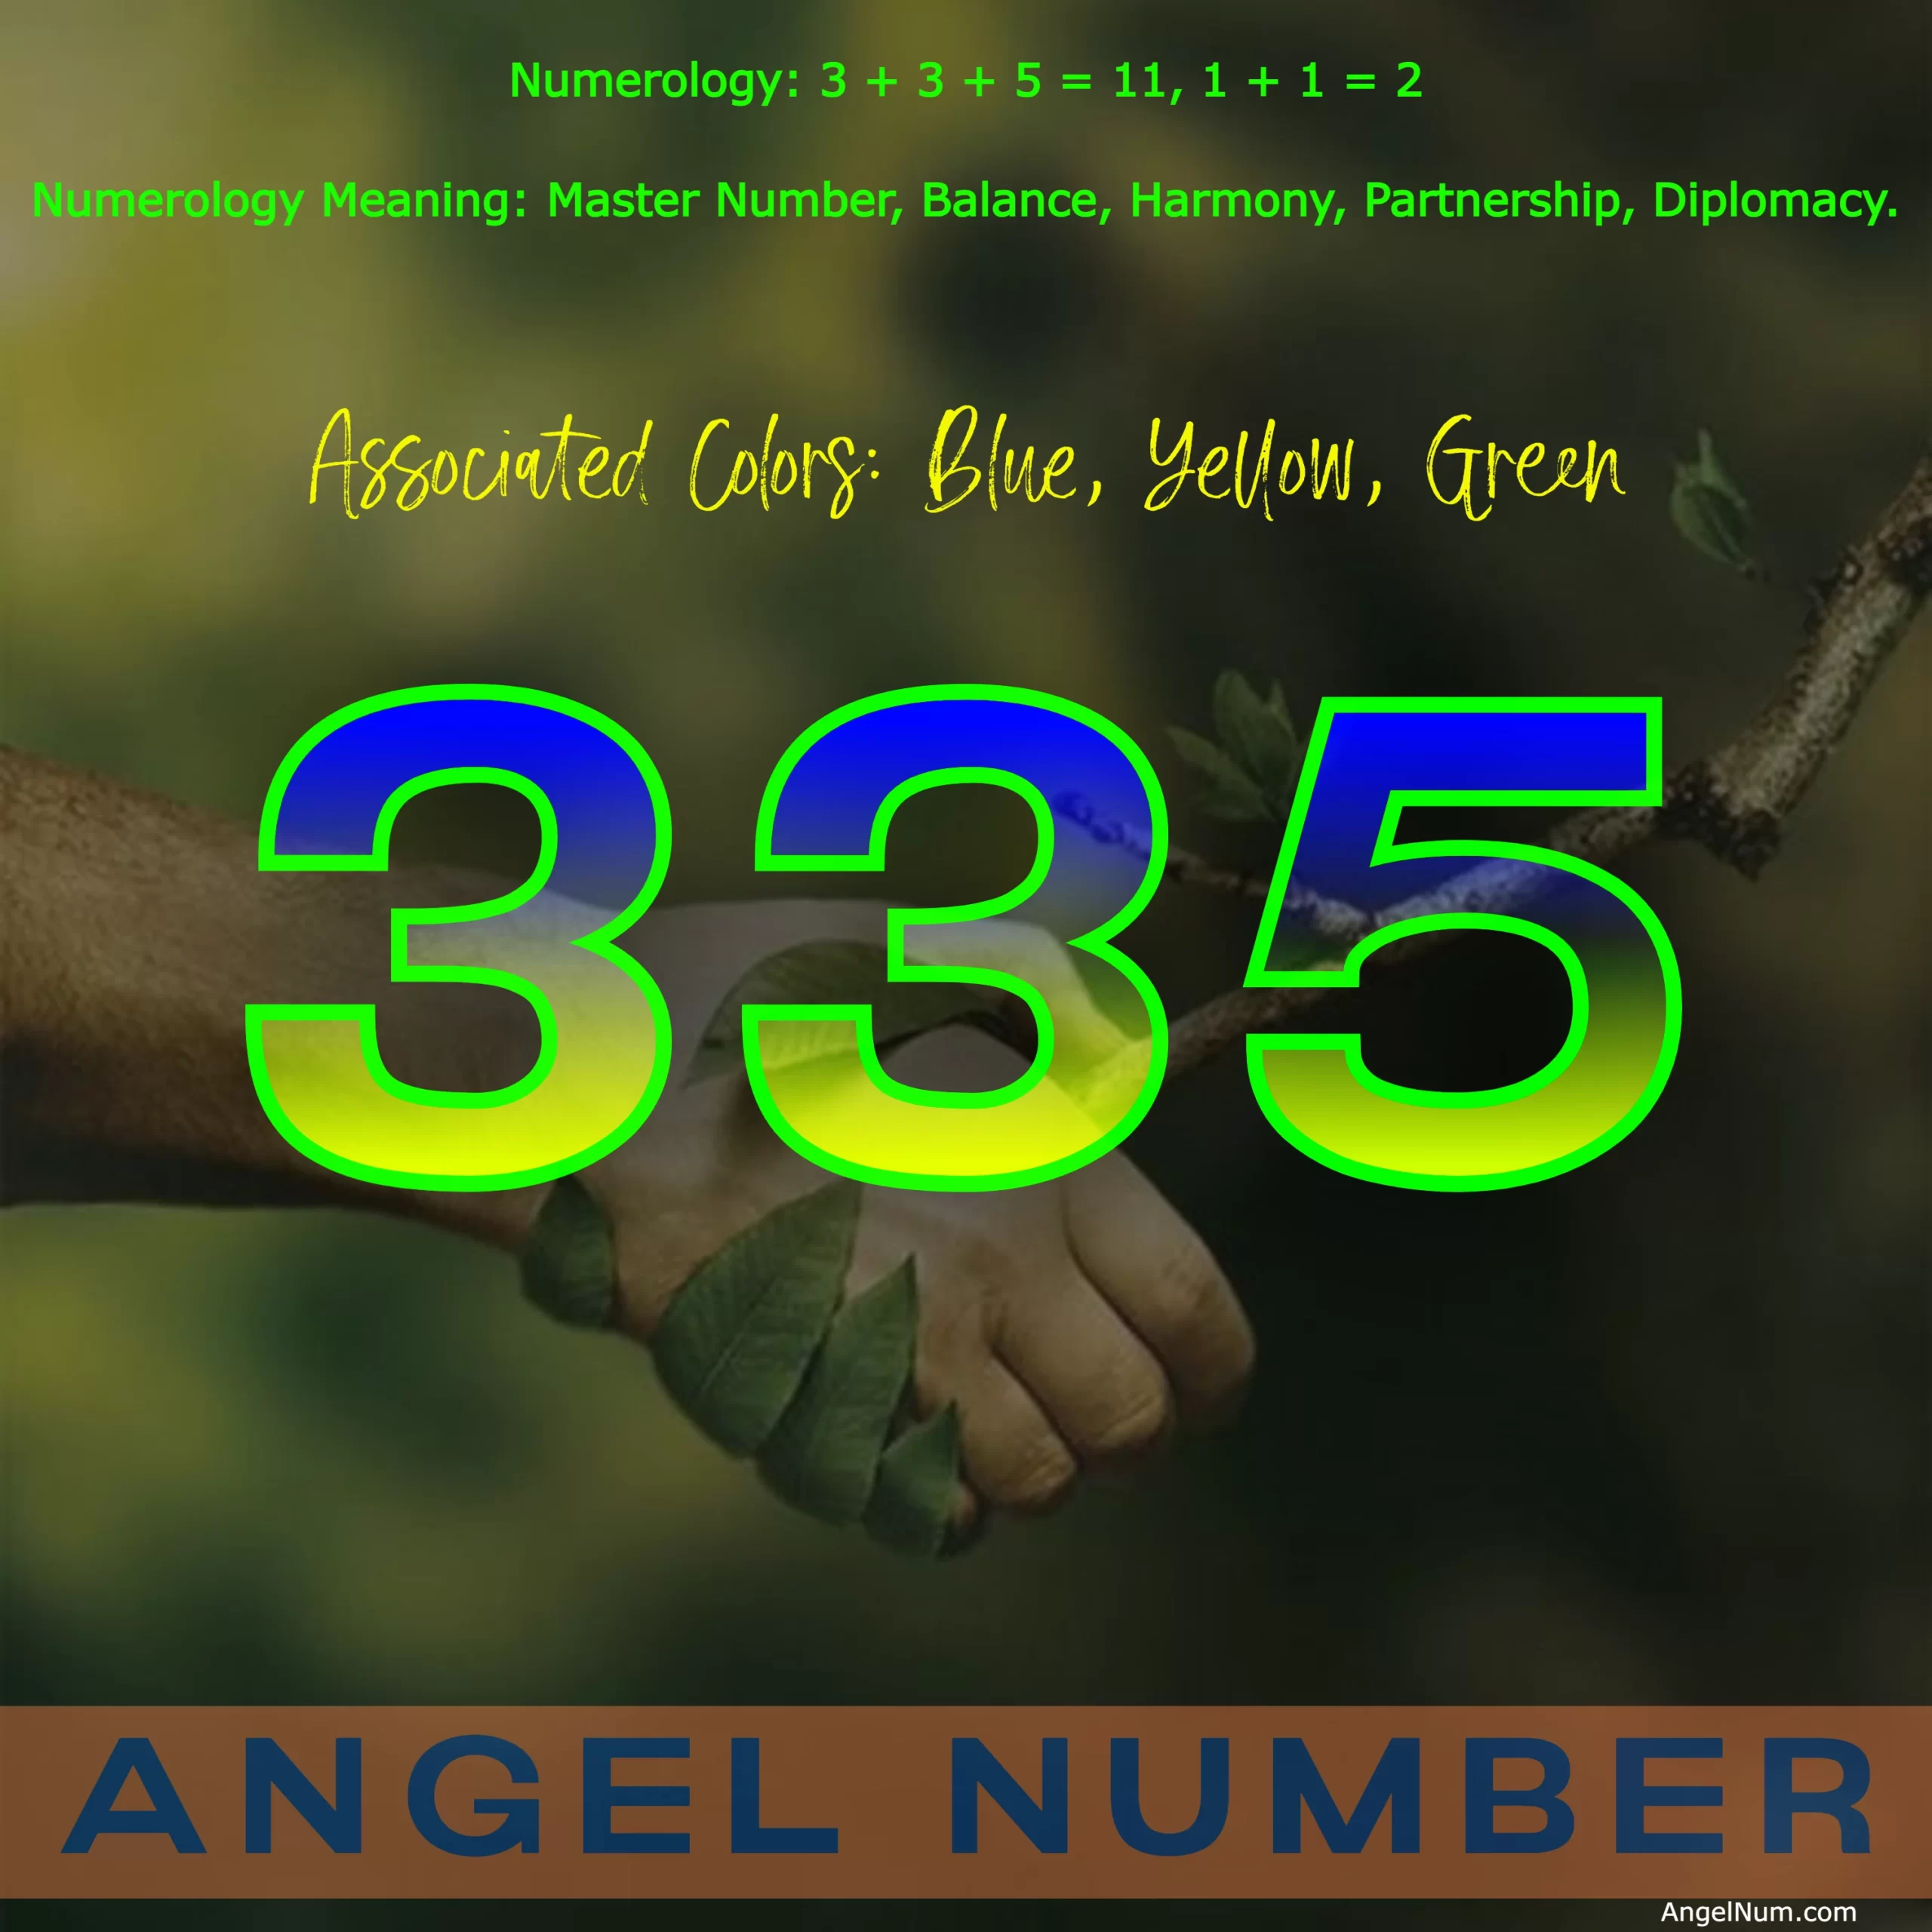 Angel Number 335: Manifest Your Desires and Trust in the Universe